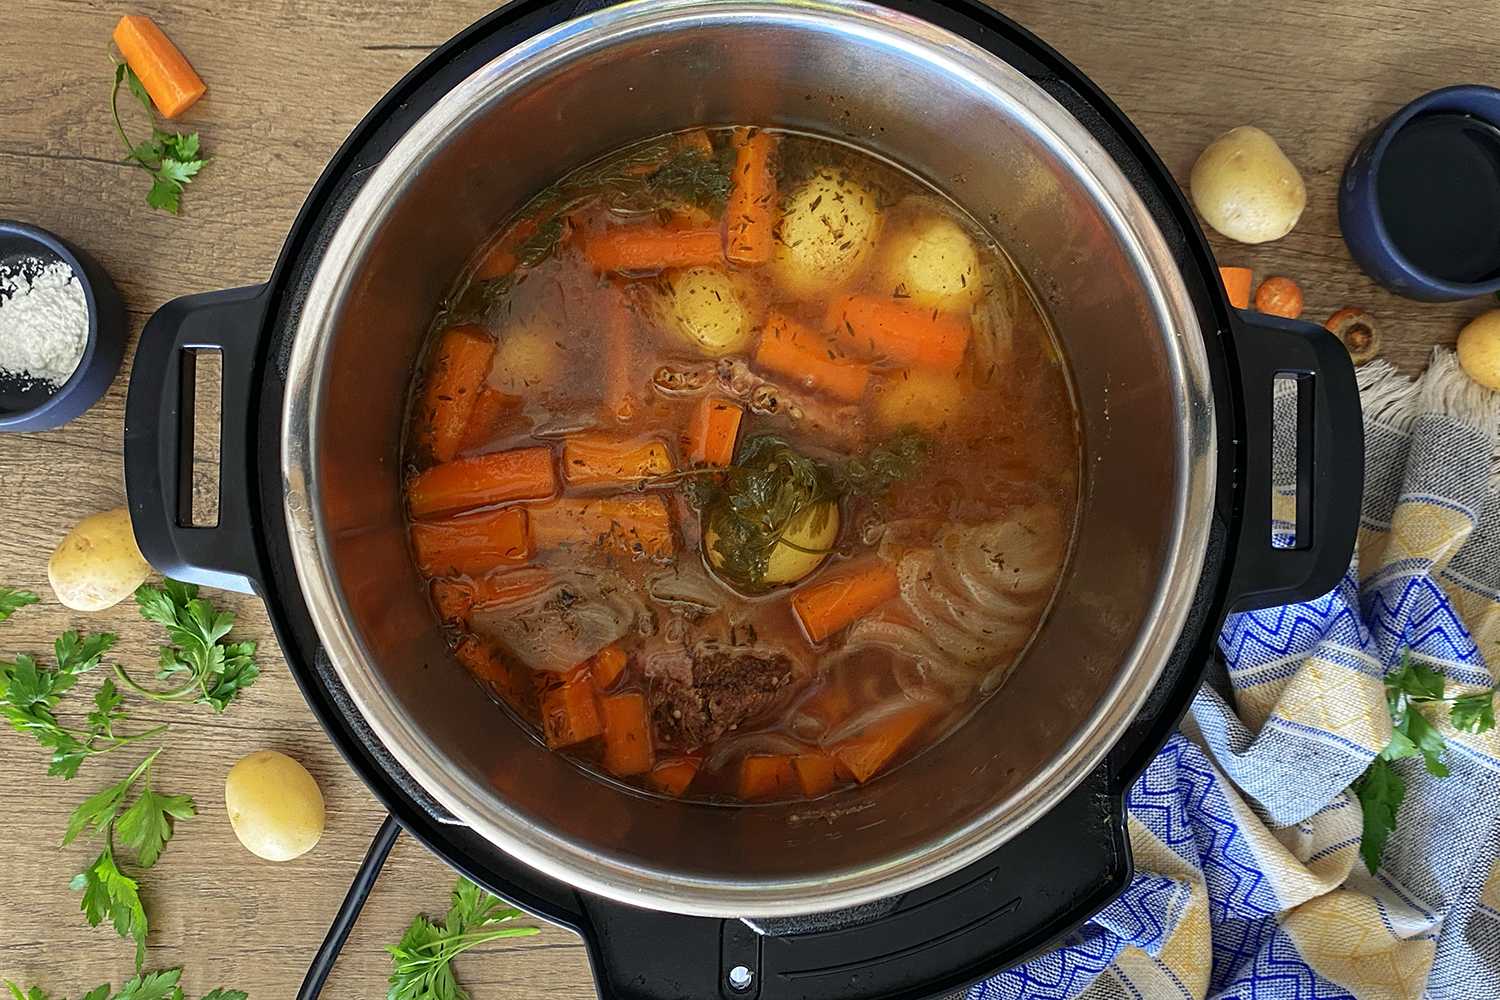 How To Make And Use A Slow-Cooker Temperature Control